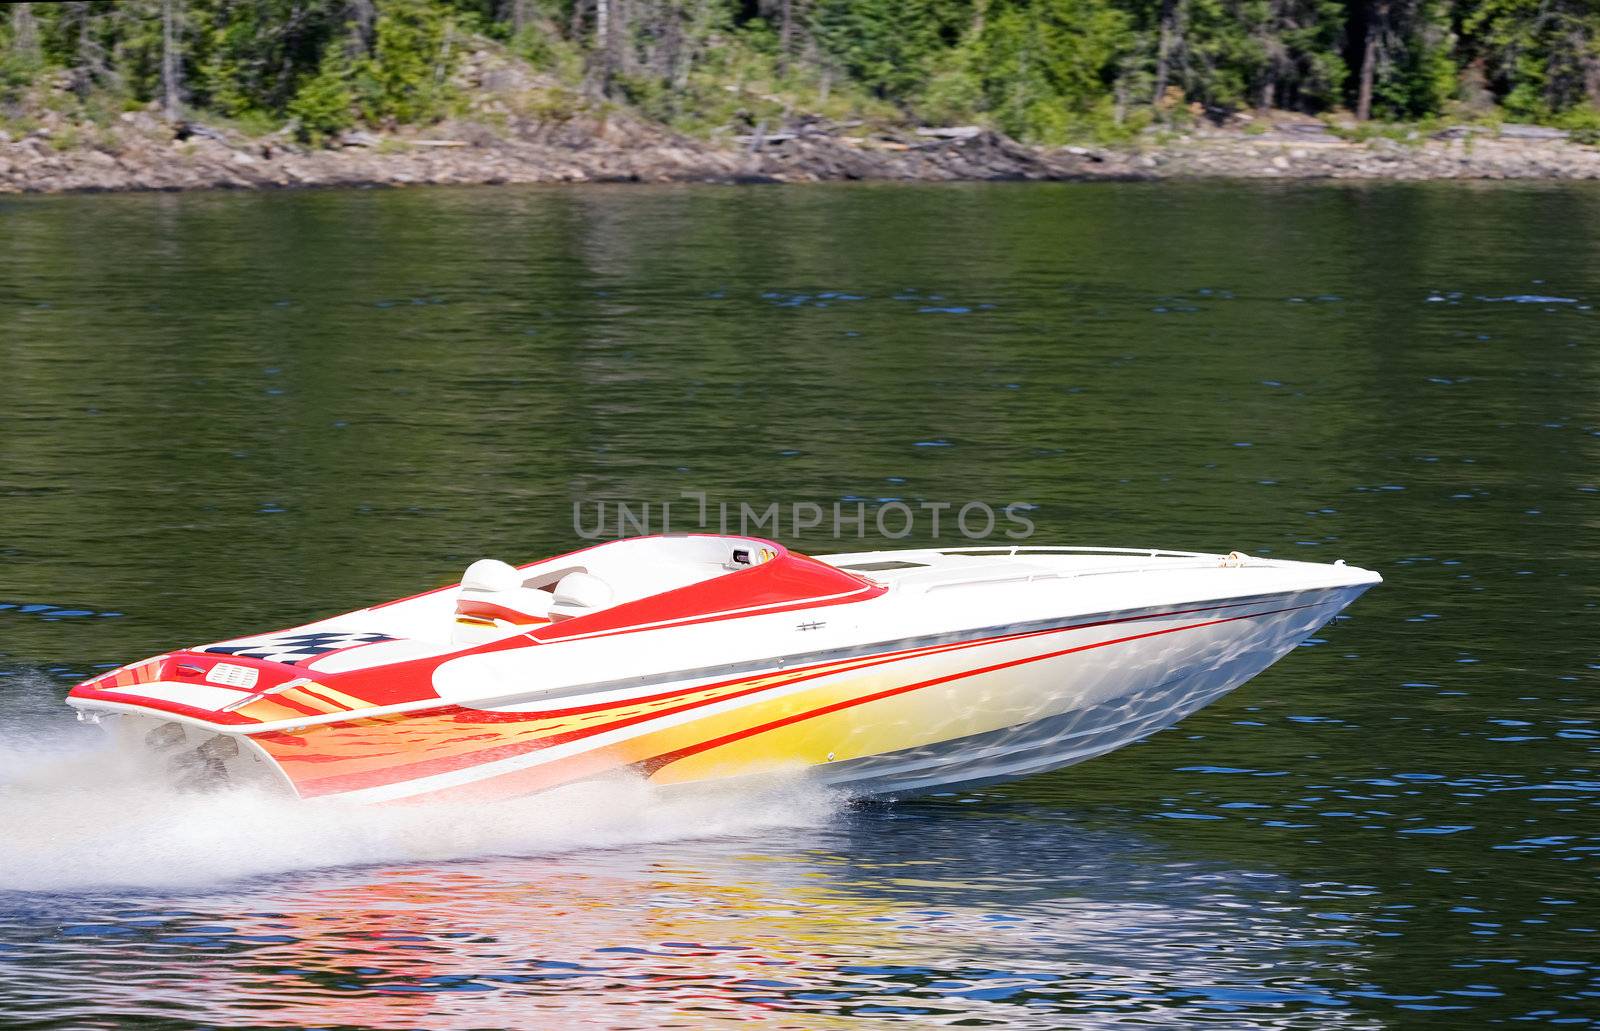 A speedboat on a lake - motion blut on the background with the boat sharp